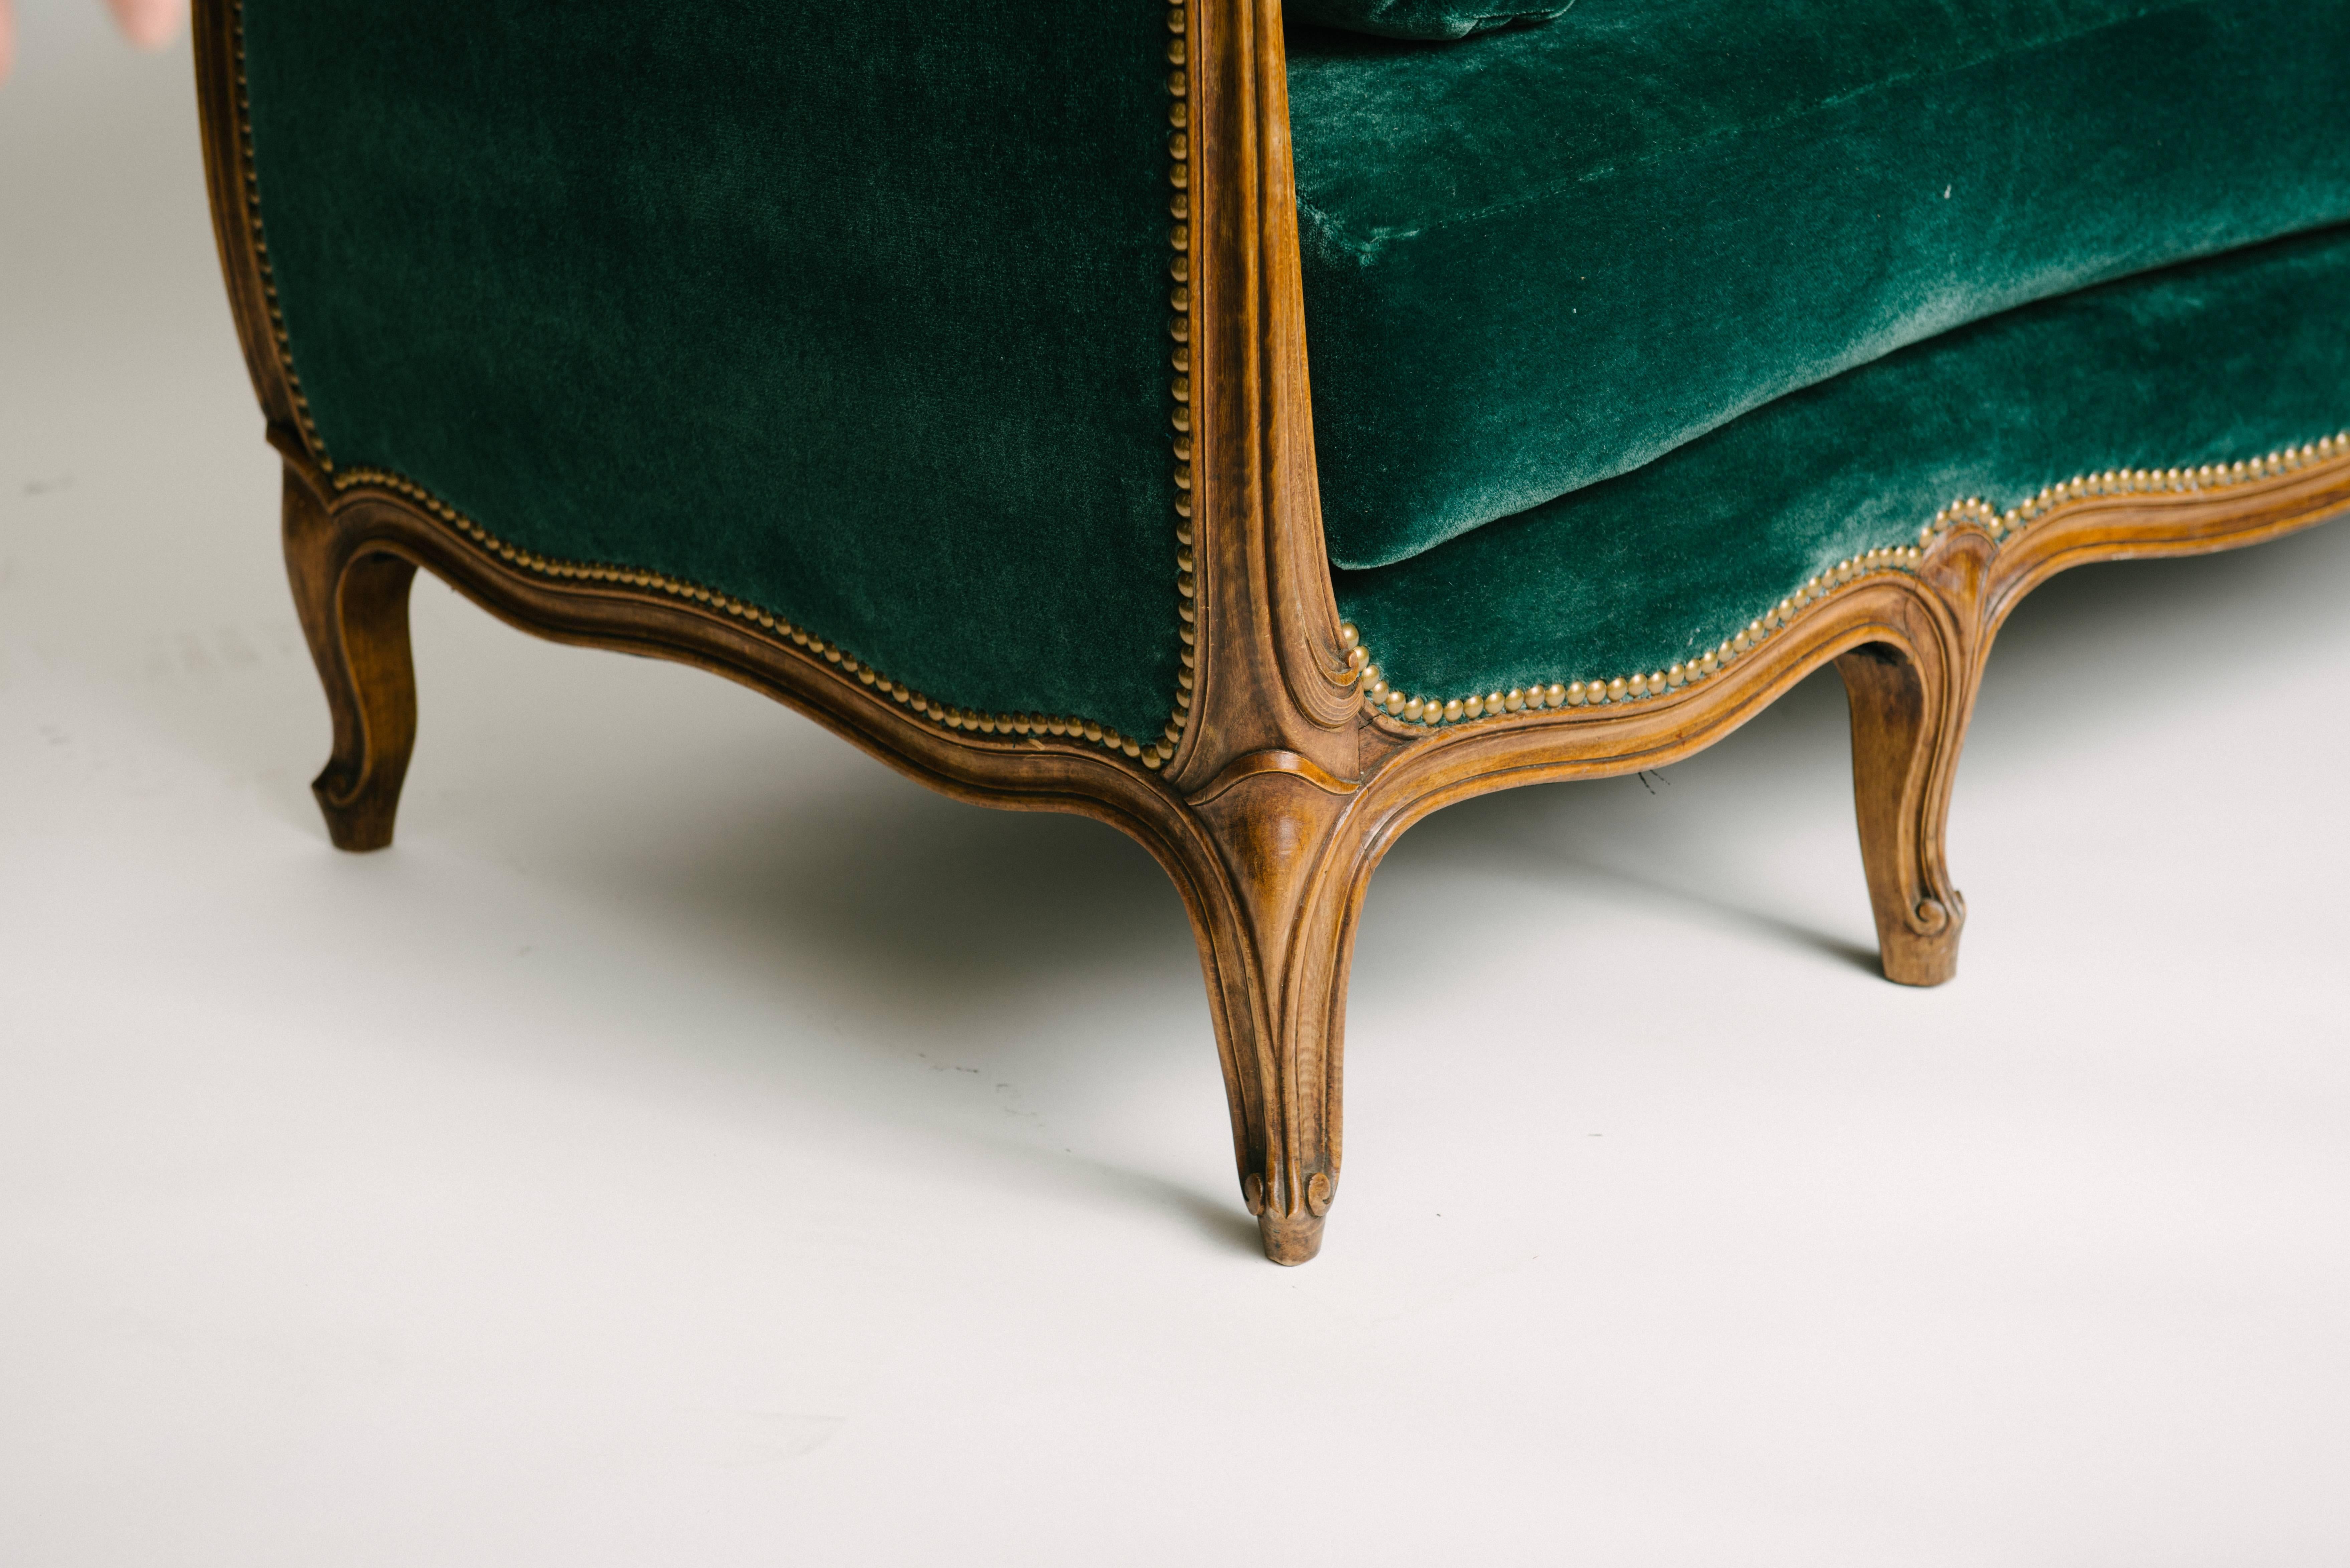 Carved 19th Century Louis XV Style Sultanes Sofa in a Dark Emerald Mohair